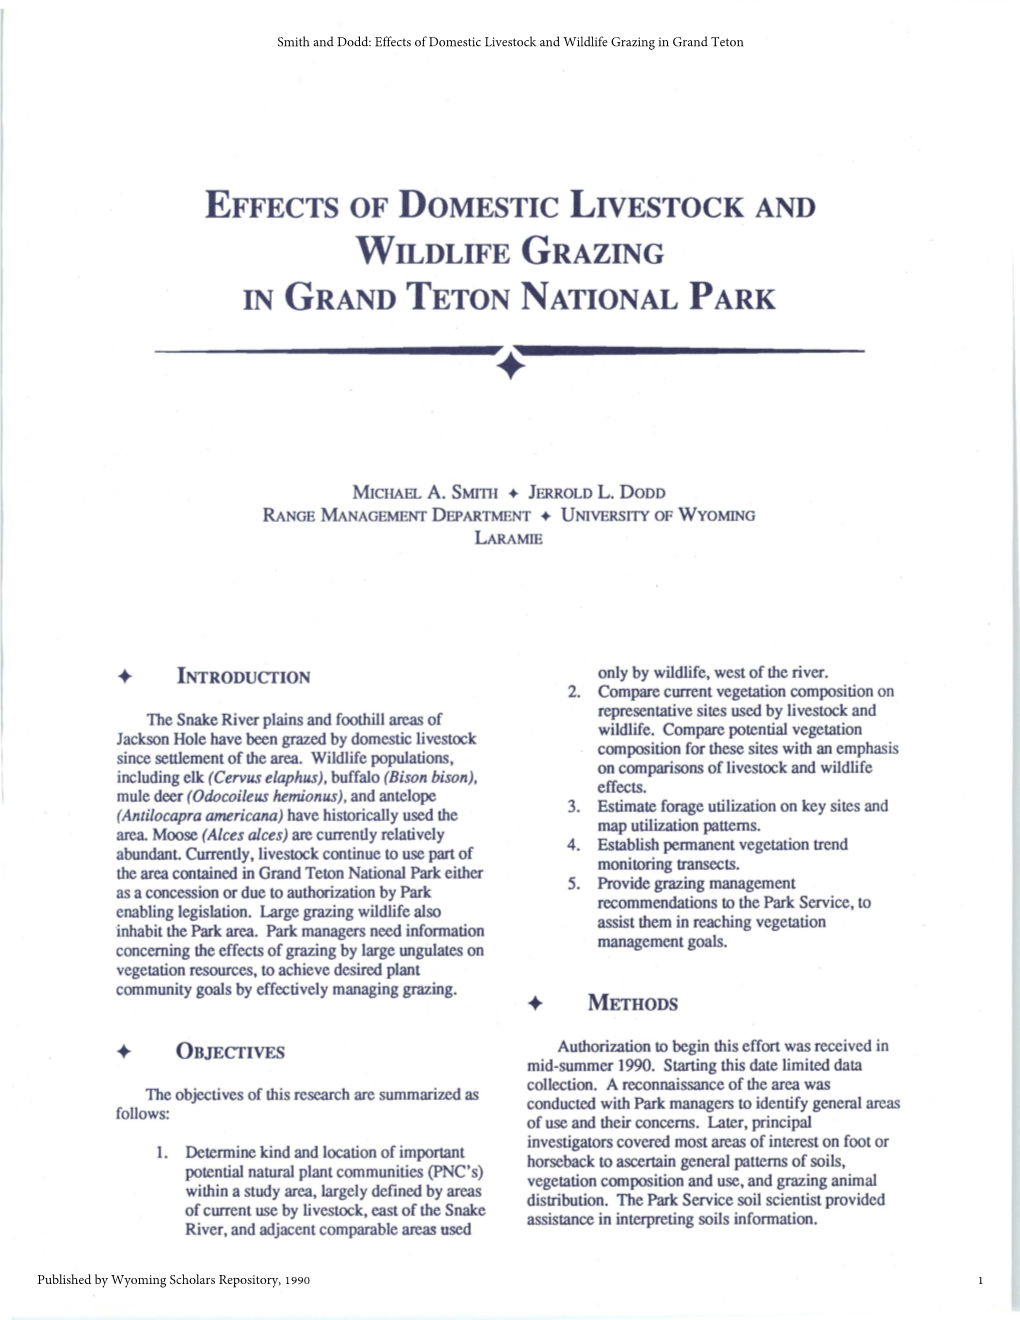 Effects of Domestic Livestock and Wildlife Grazing in Grand Teton